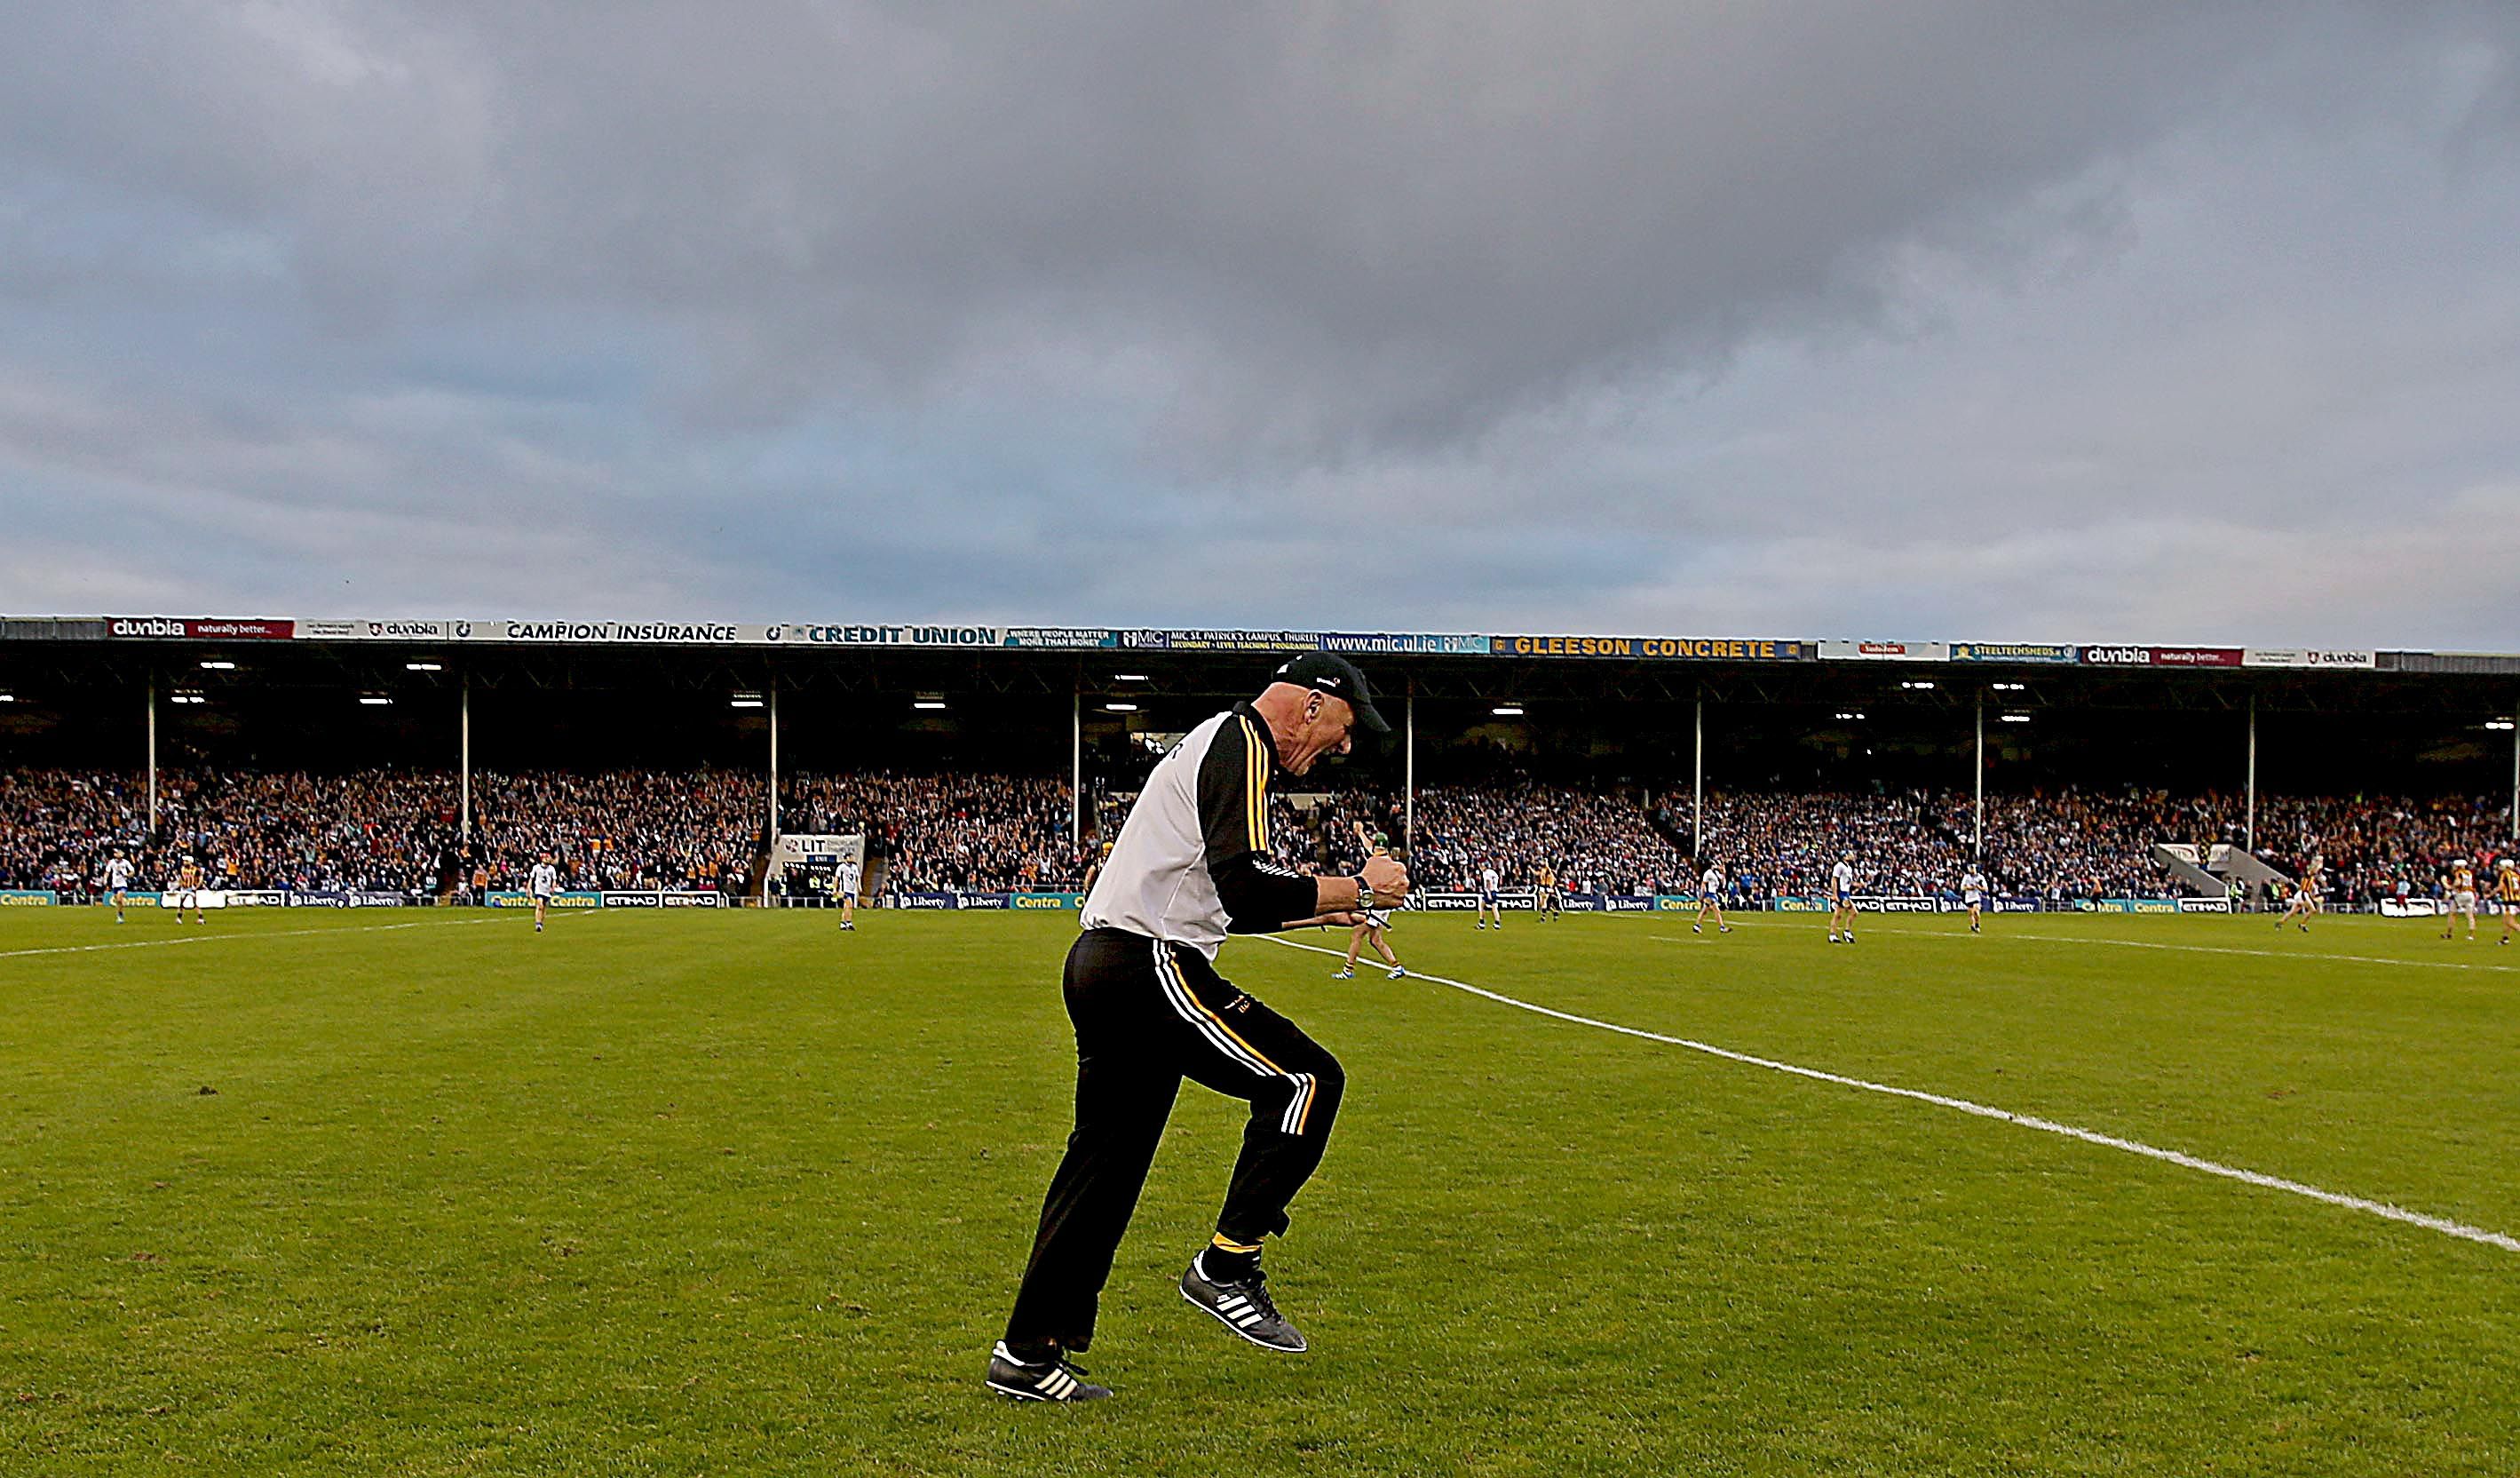 GAA All-Ireland Senior Hurling Championship Semi-Final Replay, Semple Stadium, Tipperary 13/8/2016 Kilkenny vs Waterford Kilkenny manager Brian Cody celebrates in the closing stages Mandatory Credit ©INPHO/Donall Farmer